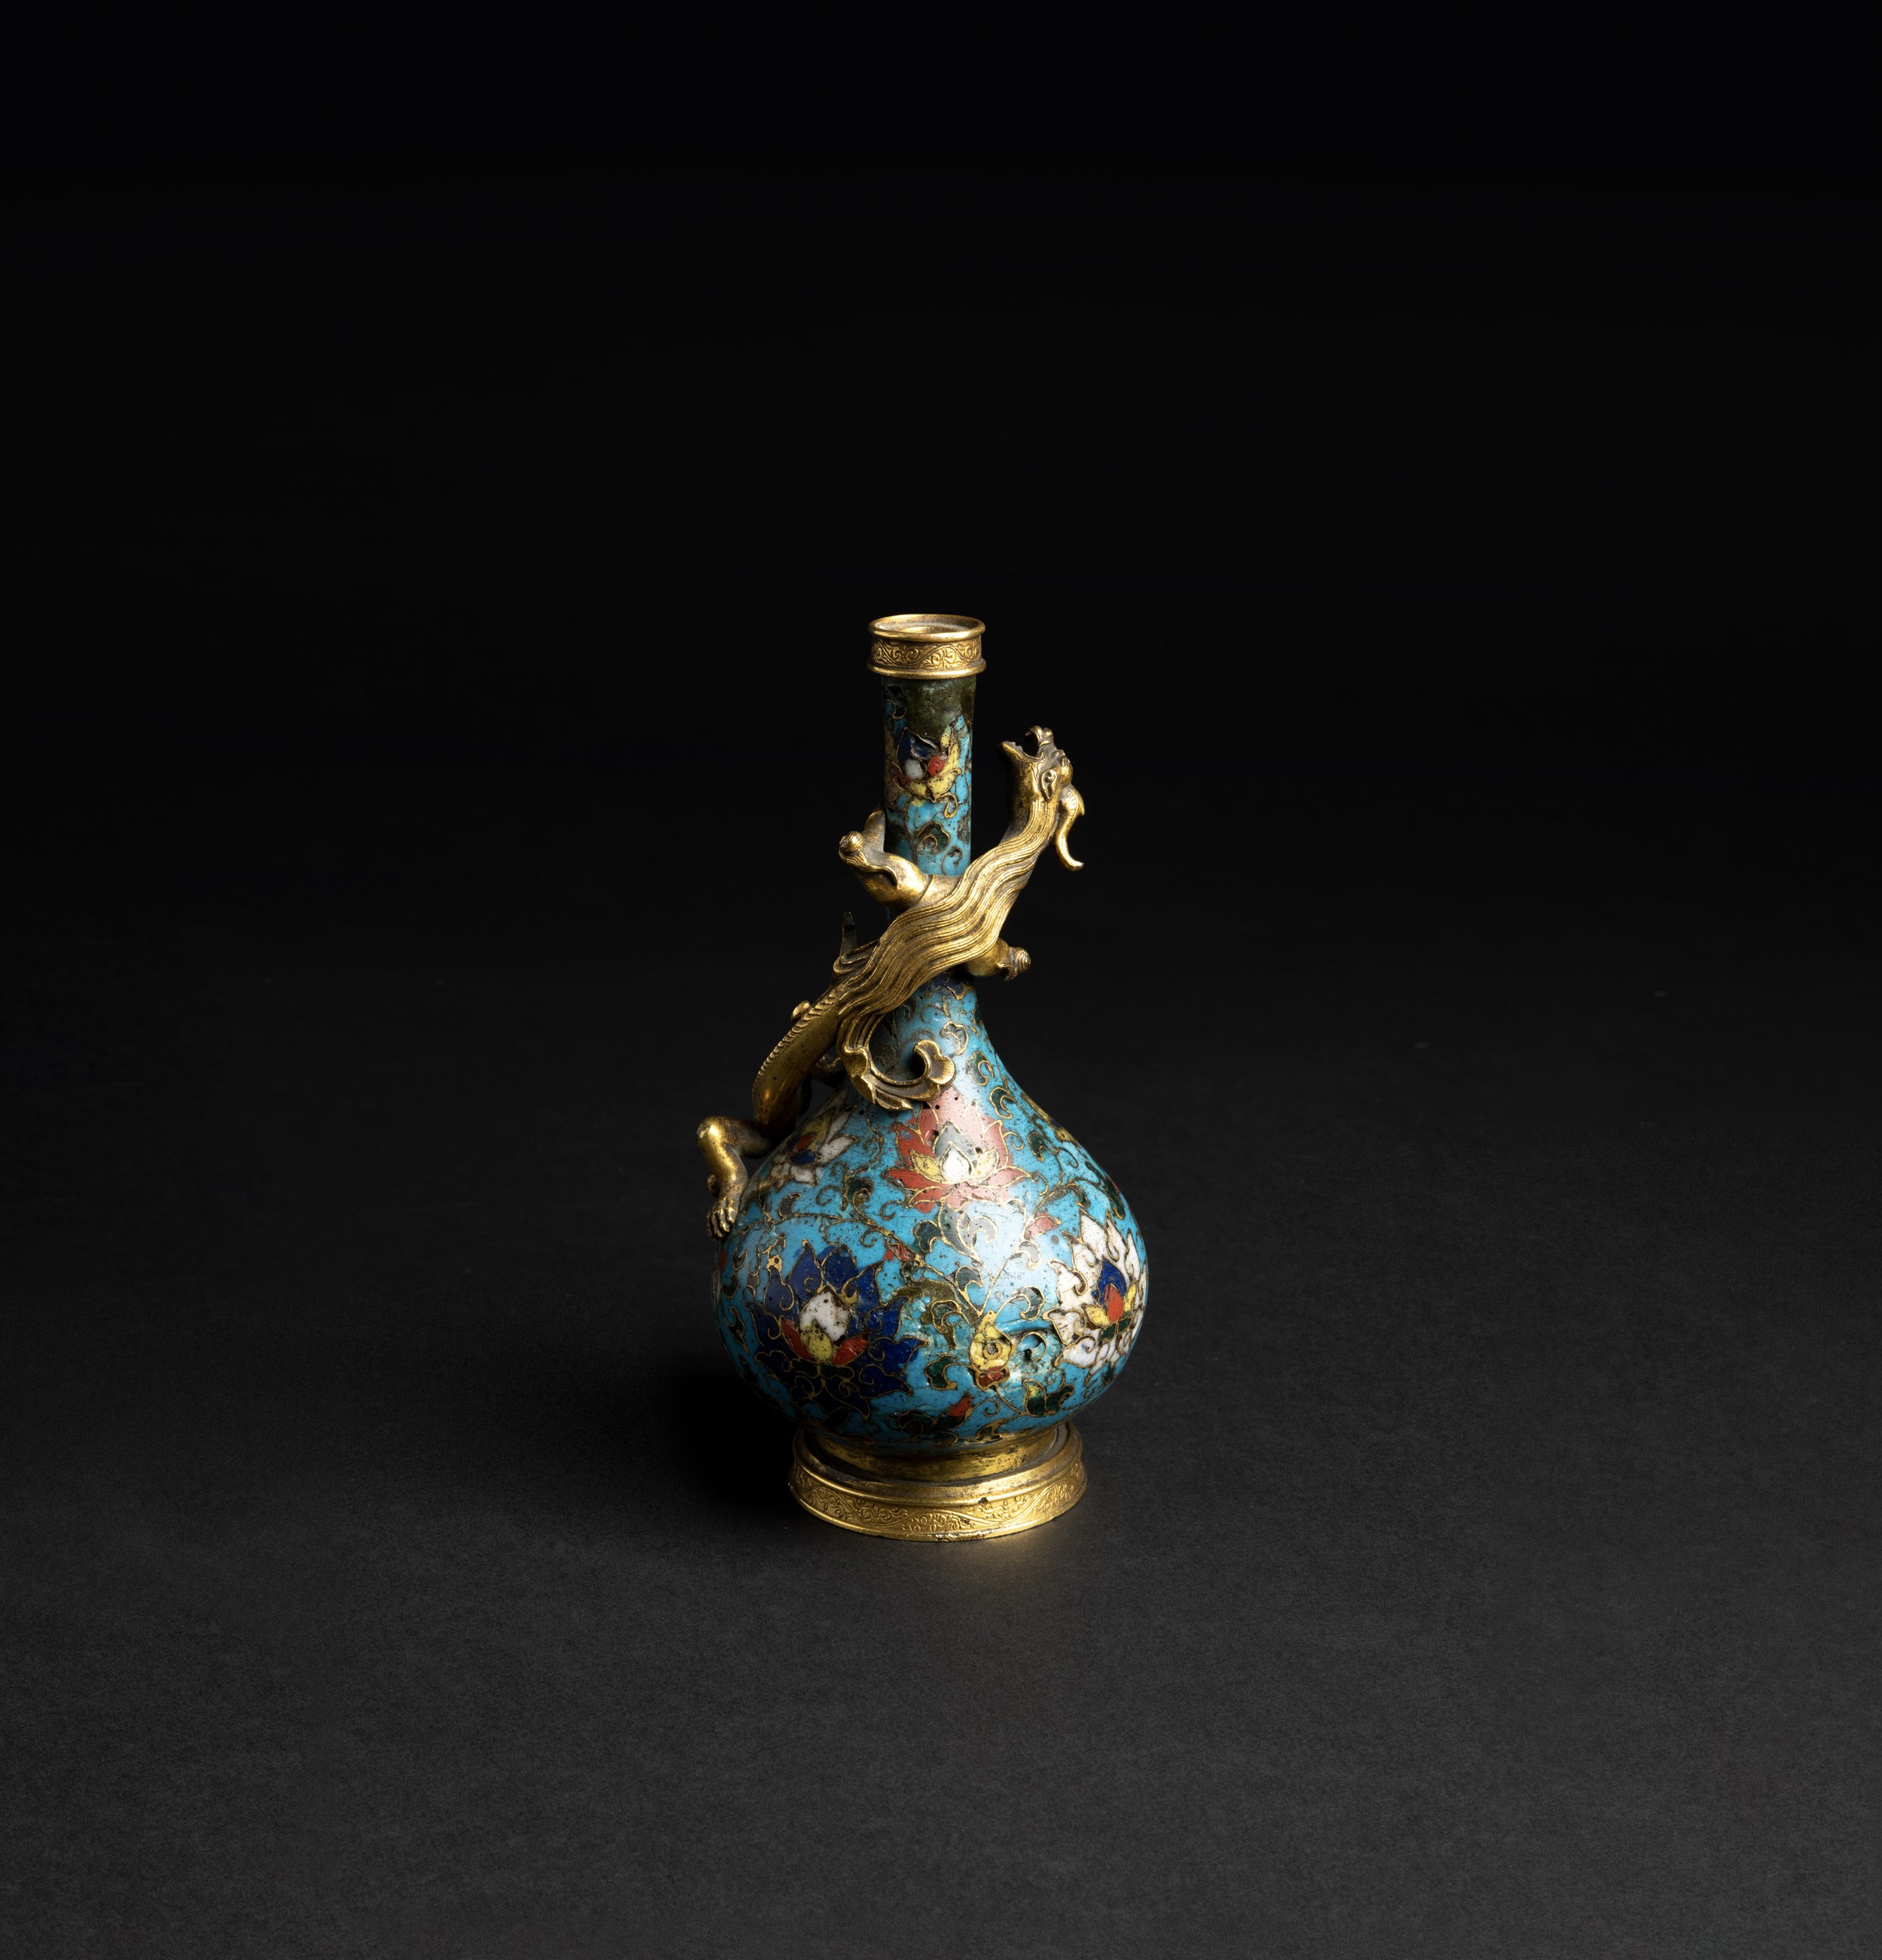 A FINE AND RARE CLOISONNE ENAMEL 'LOTUS' BOTTLE VASE INCISED JINGTAI SIX CHARACTER MARK, MID MING - Image 2 of 6